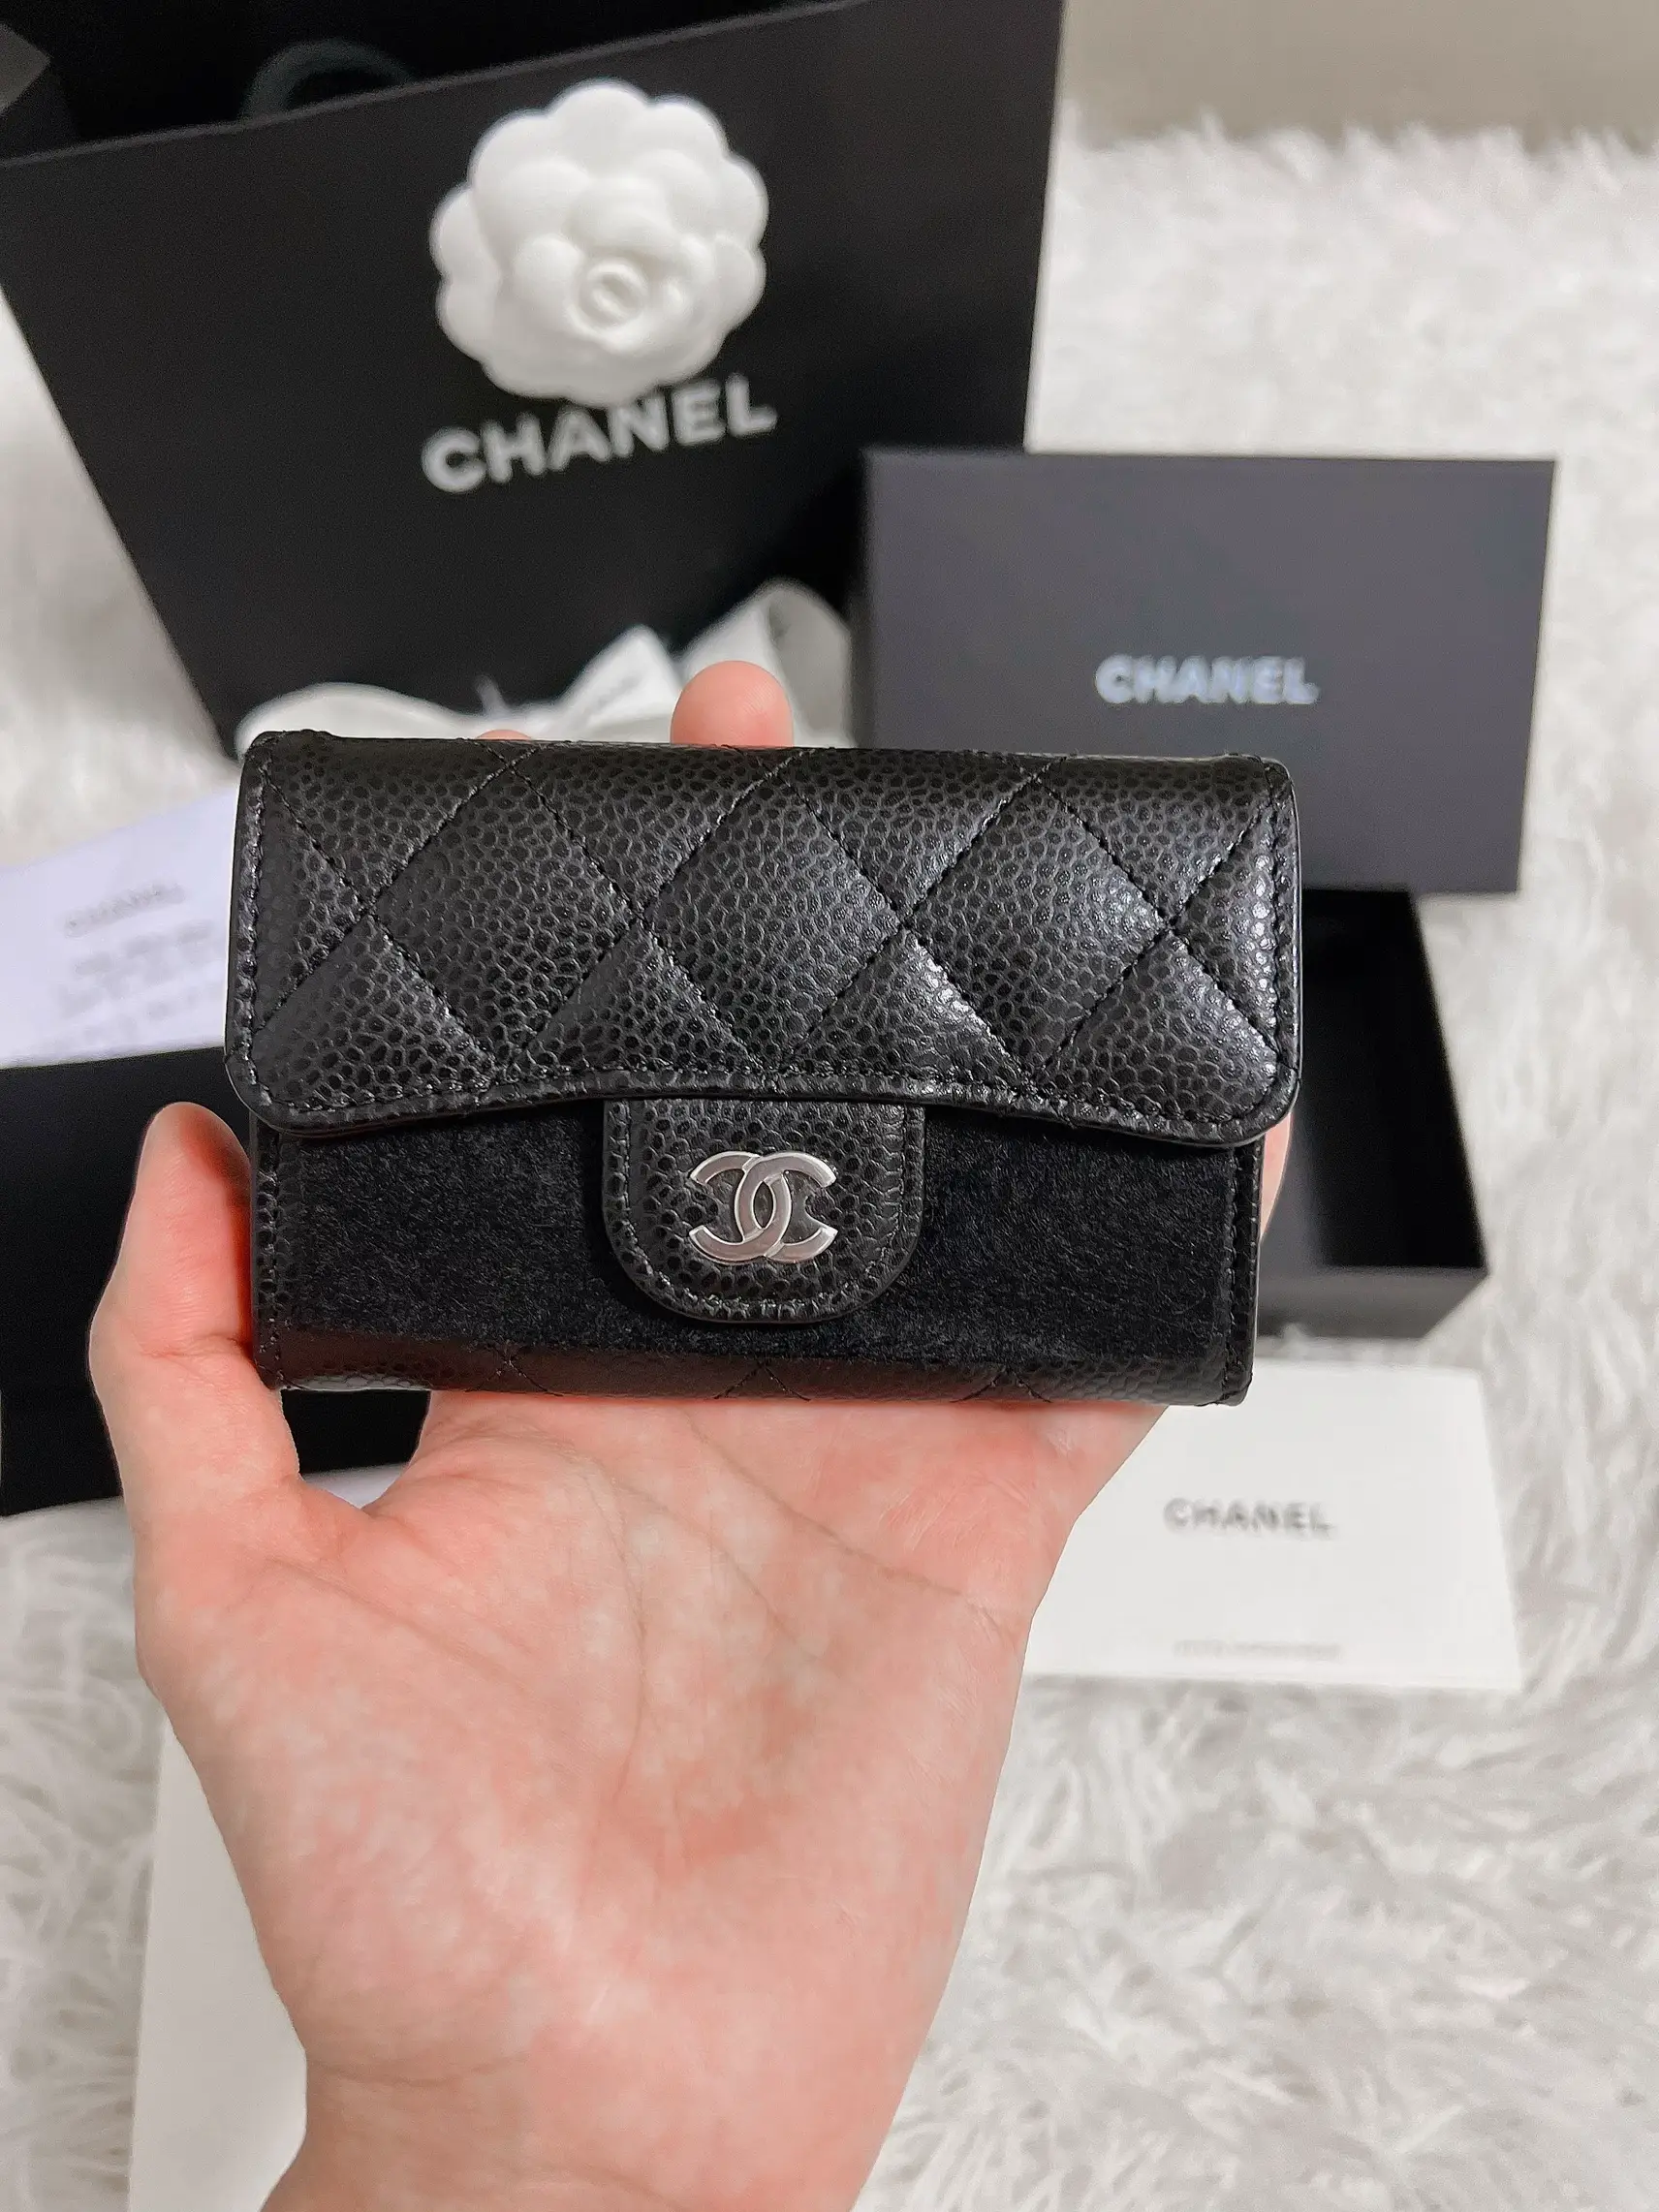 Review of Chanel Classic Card Holder Rare Mother Must Have